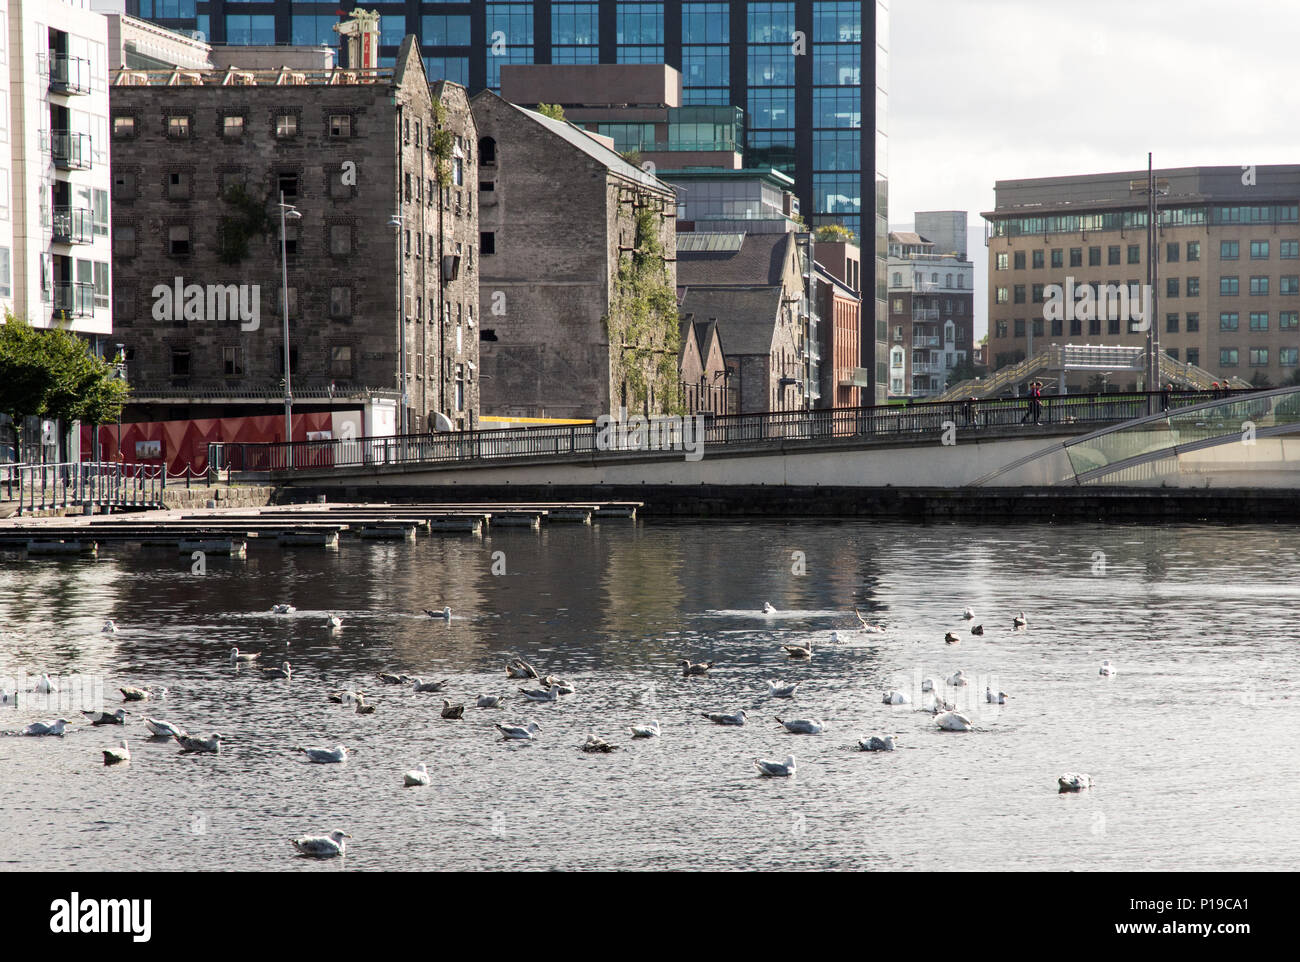 Dublin, Ireland - September 17, 2016: Old warehouses and modern office and apartment buildings side-by-side on the Grand Canal Dock in Dublin's regene Stock Photo